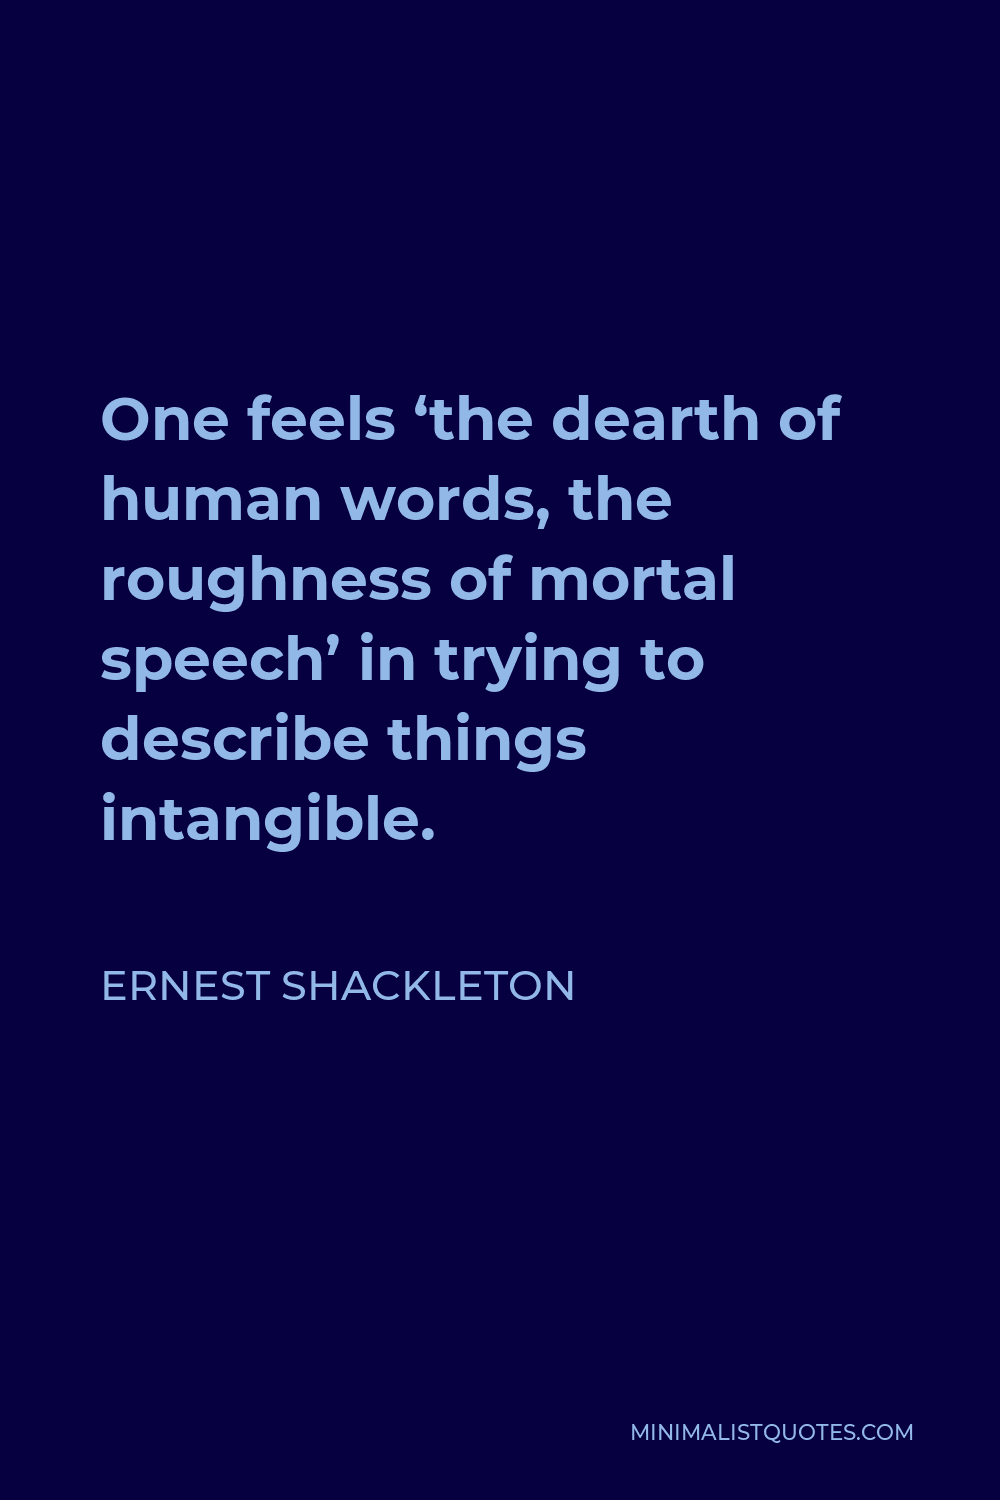 Ernest Shackleton Quote - One feels ‘the dearth of human words, the roughness of mortal speech’ in trying to describe things intangible.